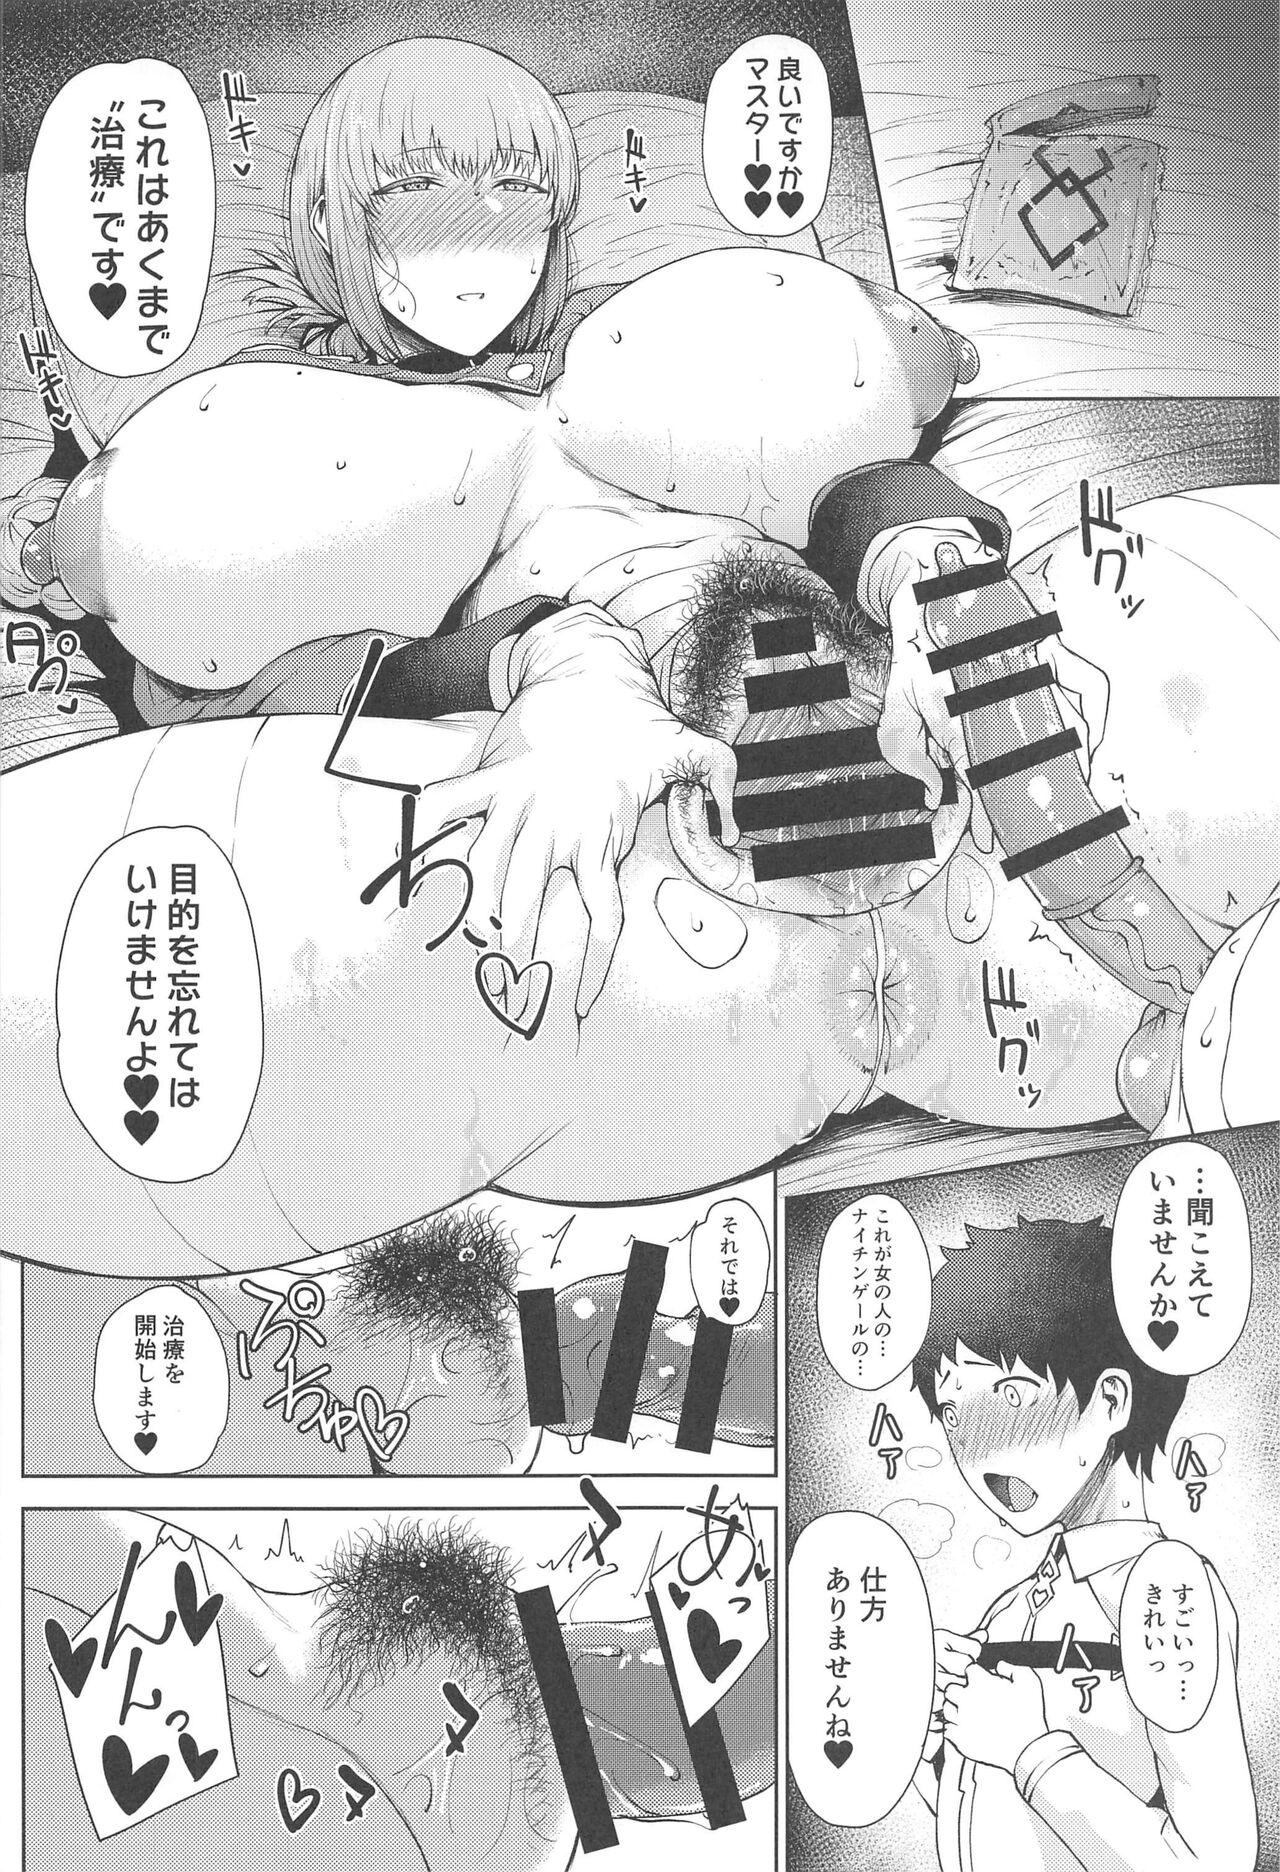 Fuck My Pussy Chiryou desu - Fate grand order Amateur Sex - Page 7